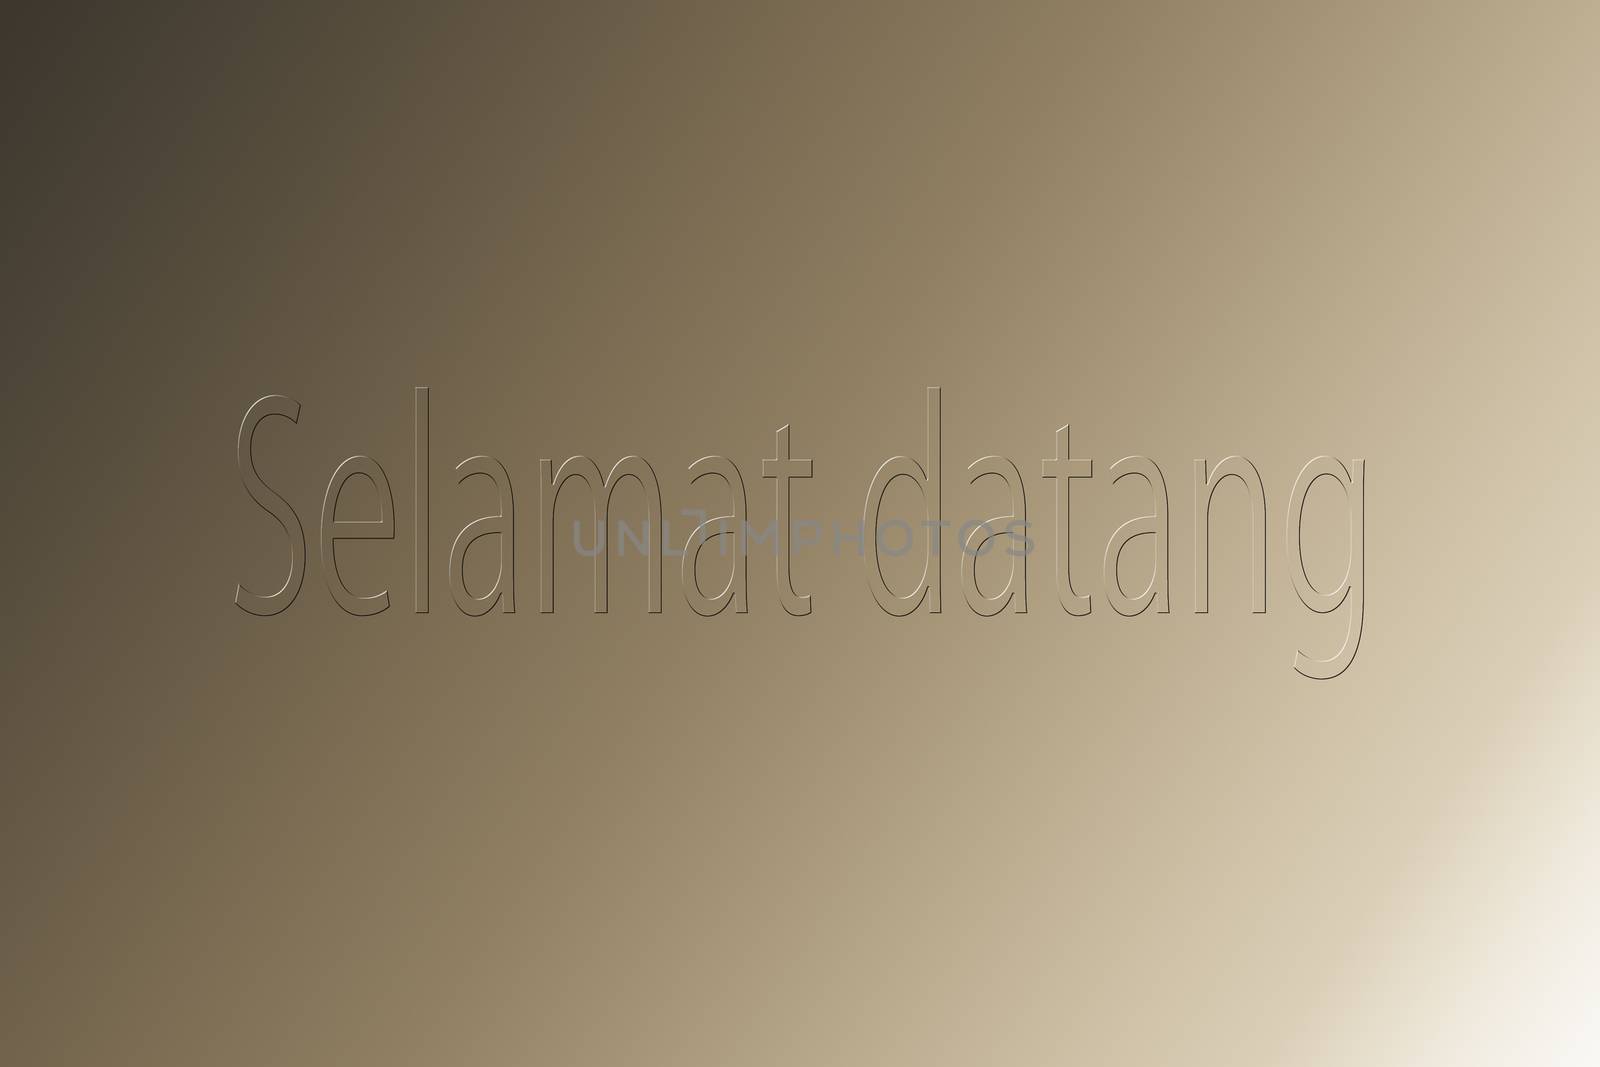 Welcome text in Indonesian language